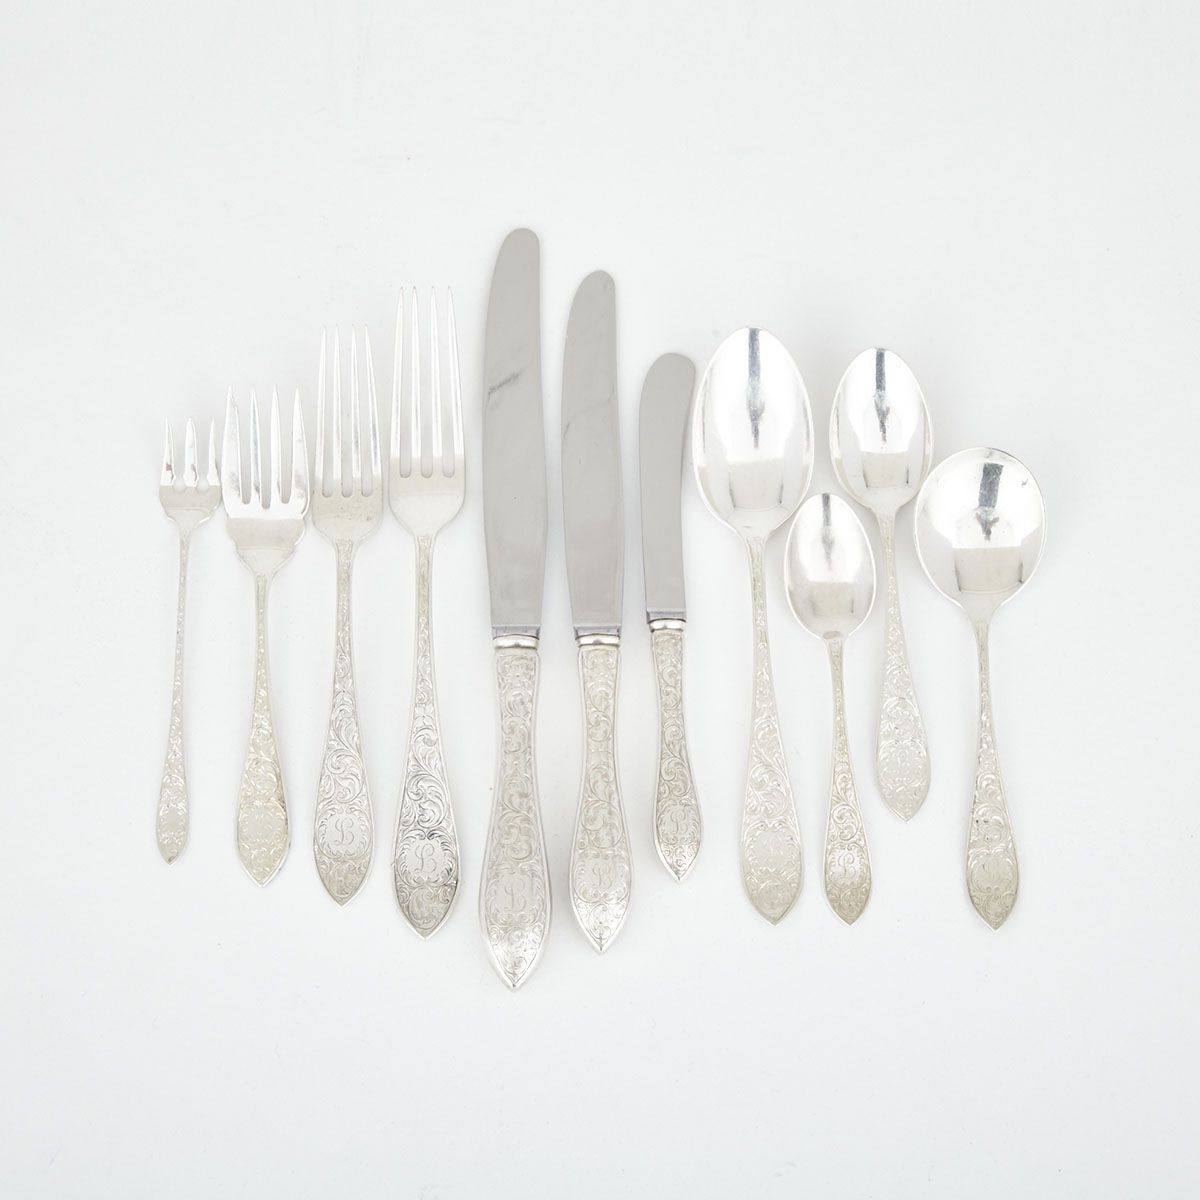 Canadian Silver ‘Tudor Scroll’ Pattern Flatware, Henry Birks & Sons, Montreal, Que, 20th century